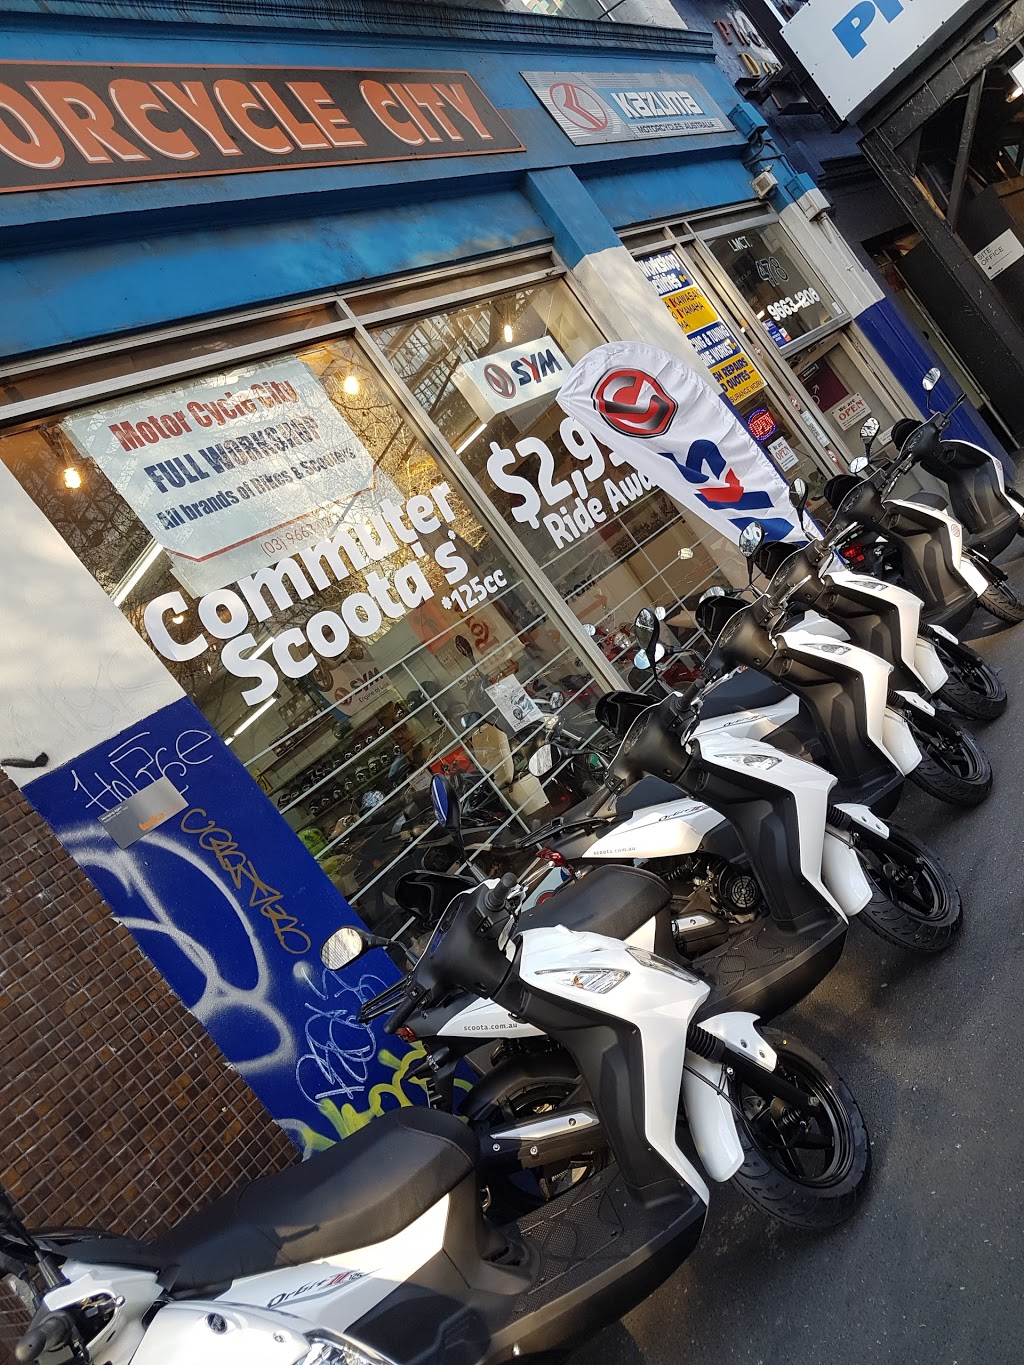 Motorcycle City | car repair | 75 Arden St, North Melbourne VIC 3051, Australia | 0396631200 OR +61 3 9663 1200